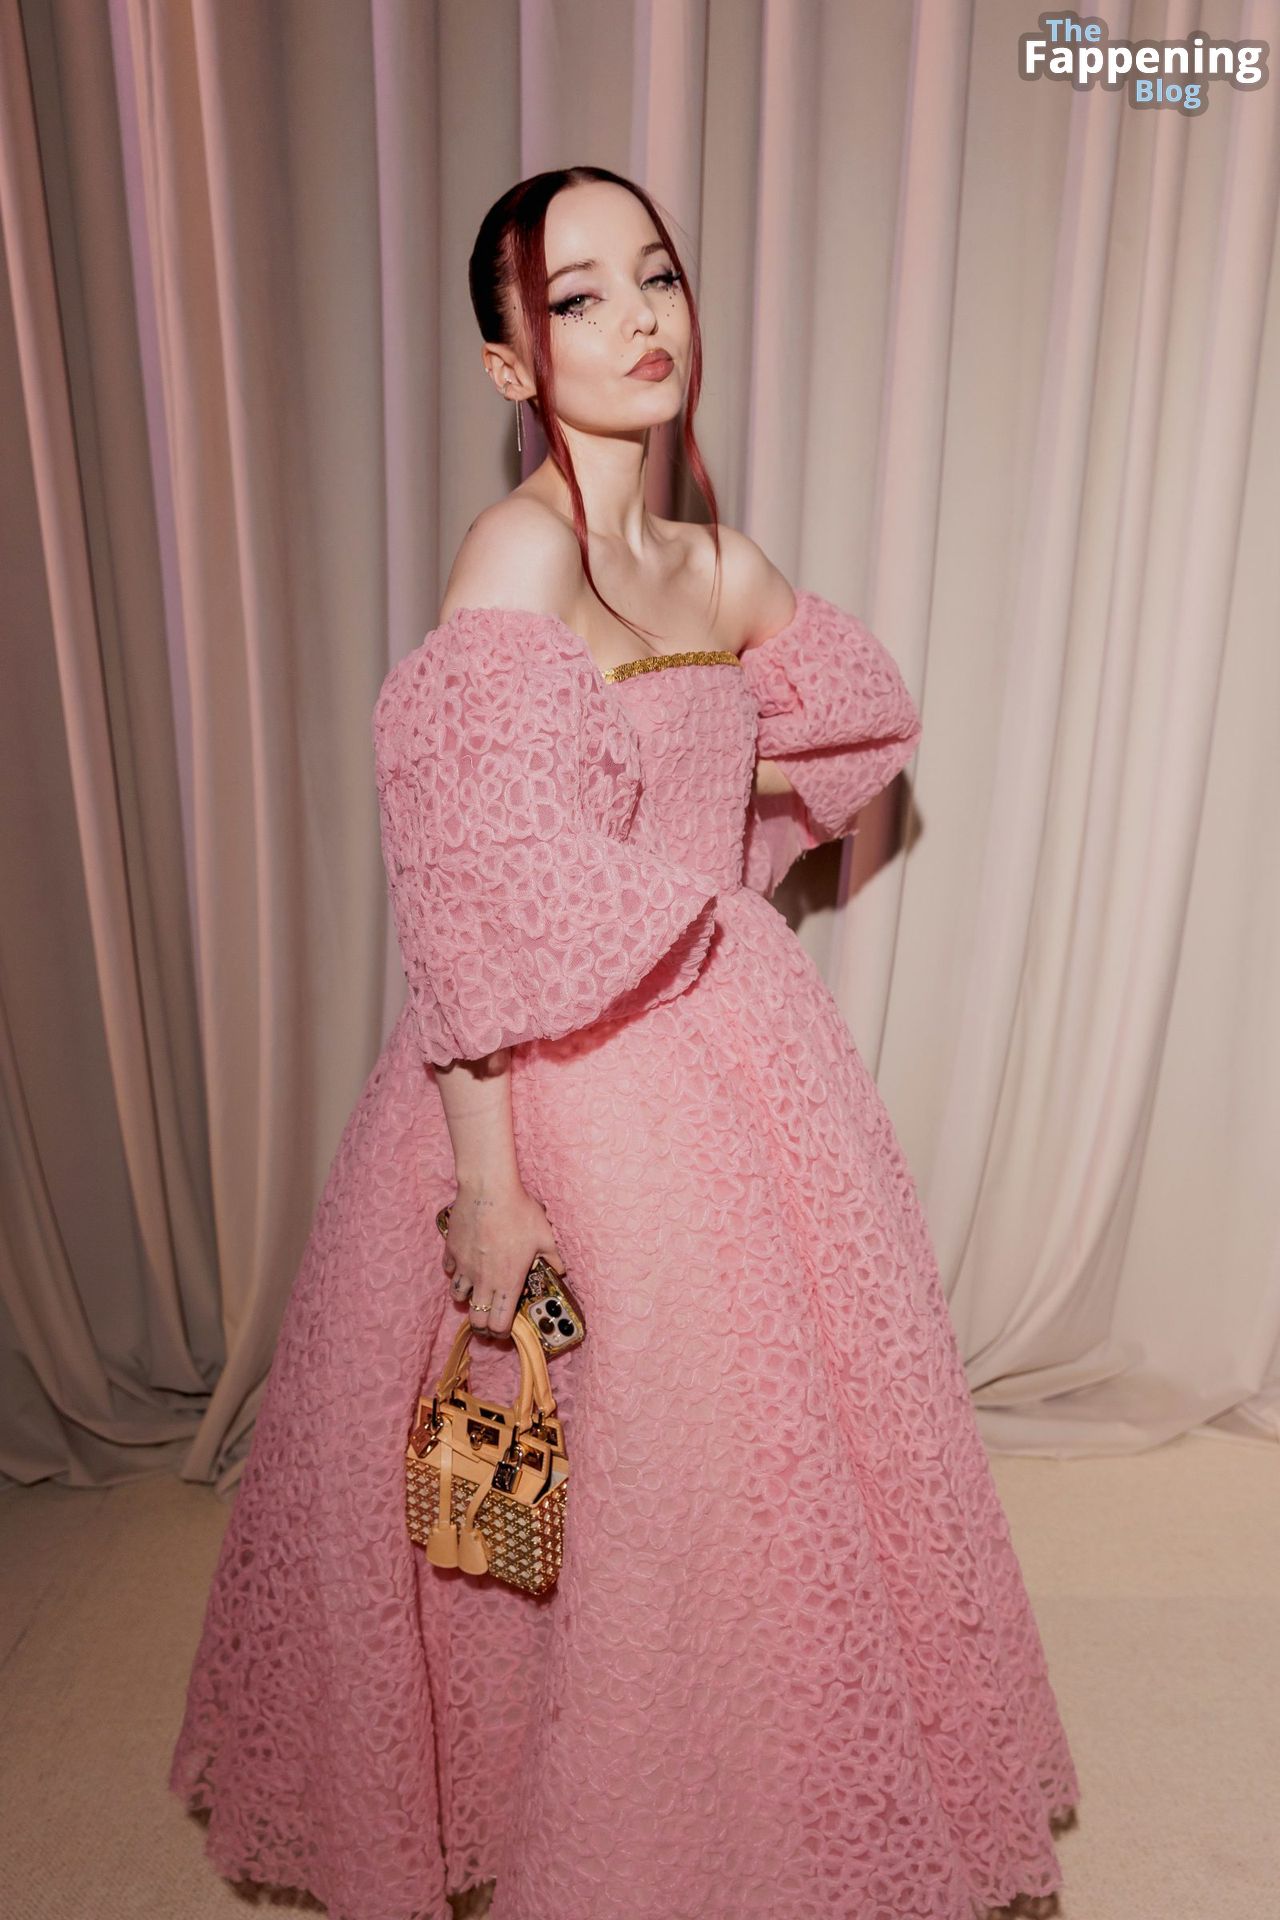 Dove Cameron Looks Beautiful in a Pink Dress at the Giambattista Valli Fashion Show in Paris (19 Photos)